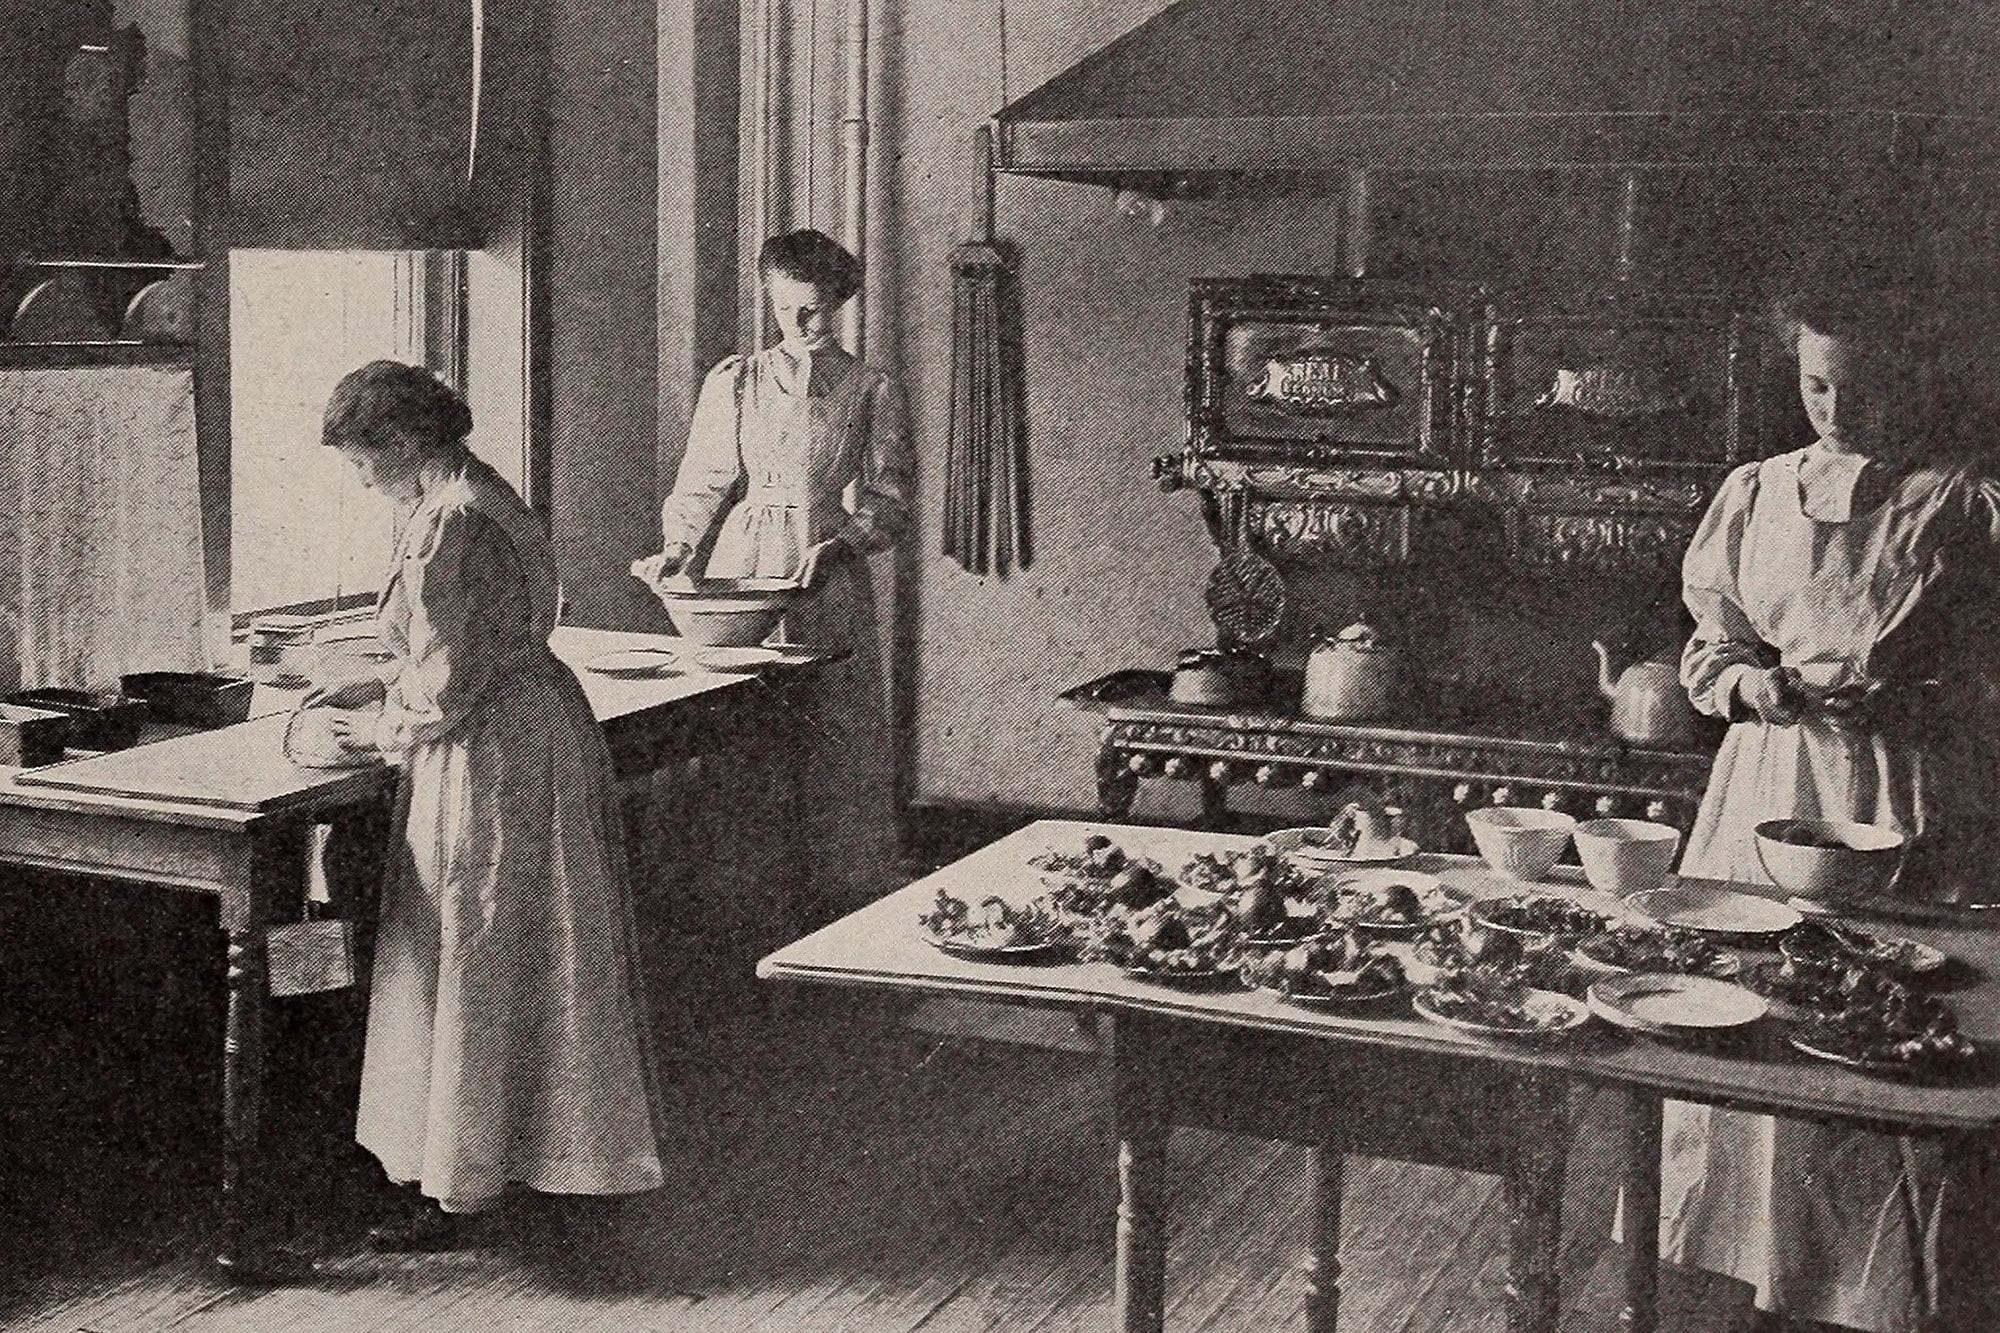 Cookbooks and Contagion: Recipes for Caring from Fannie Farmer